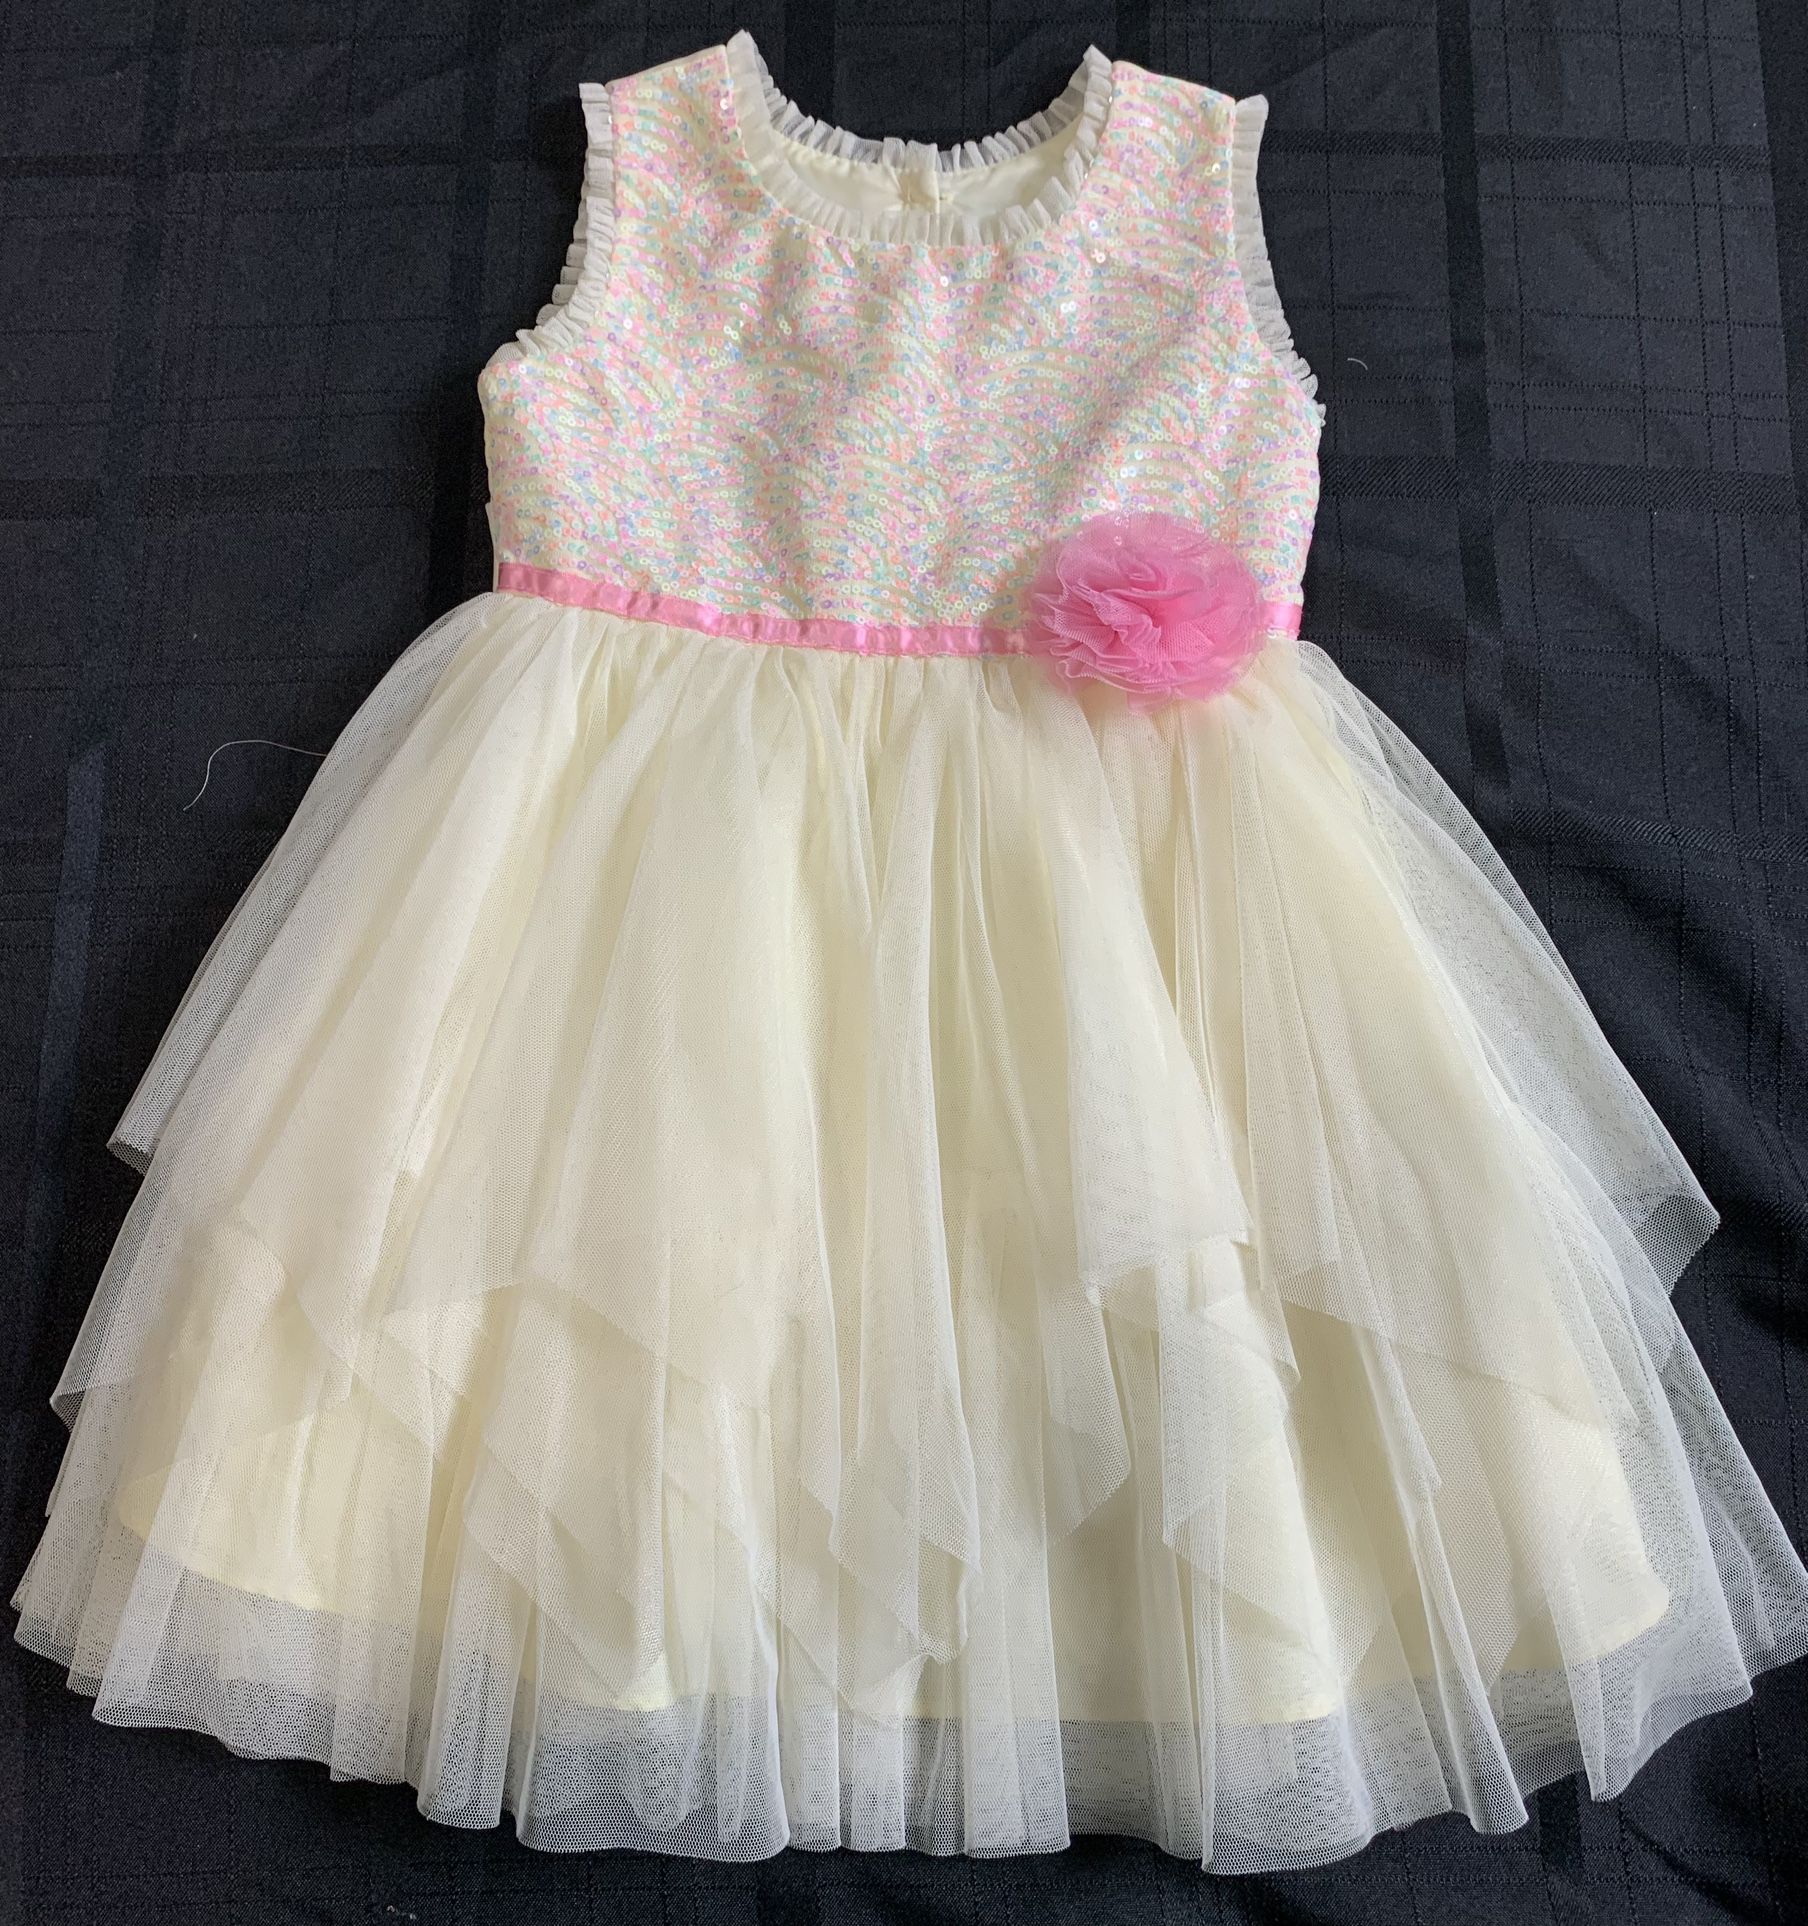 Beautiful Jona Michelle girls size 4T sparkly sequined light yellow spring Easter dress 